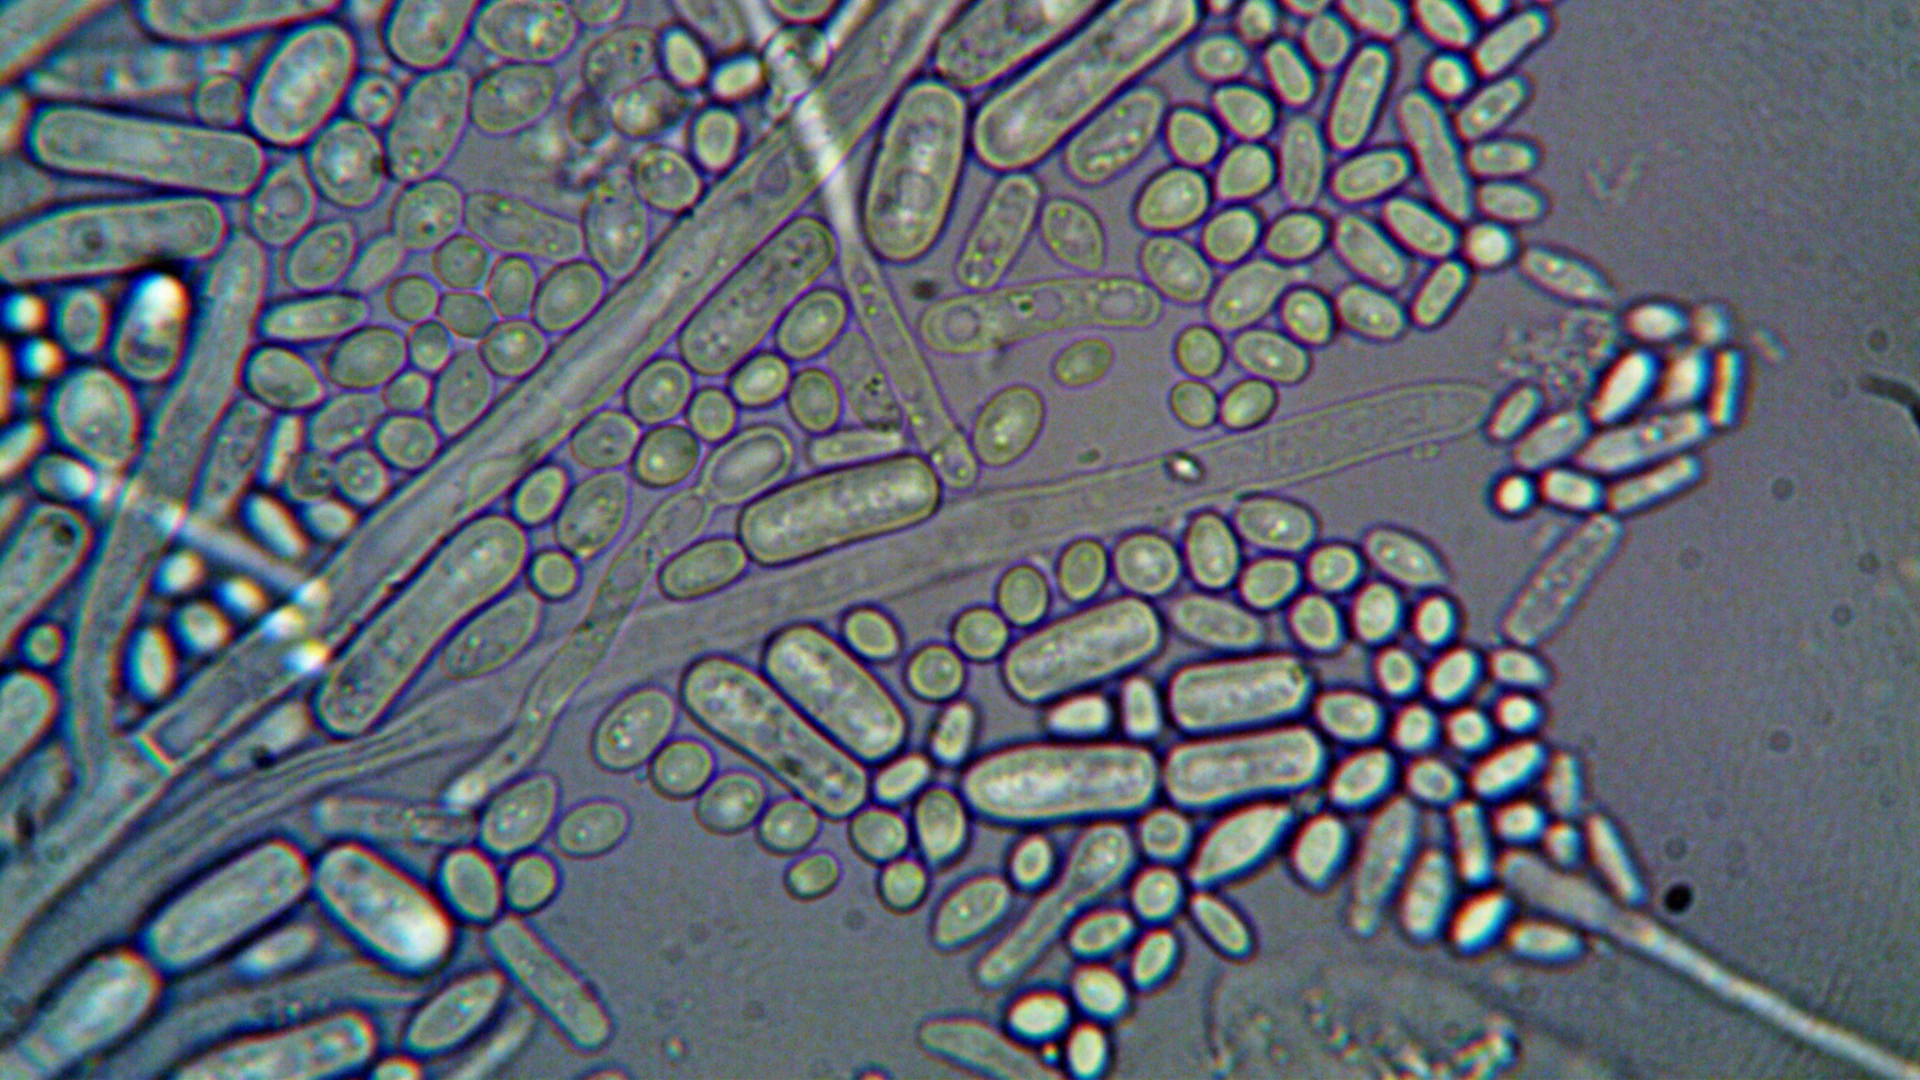 A close-up view of microorganisms, also known as microbes.